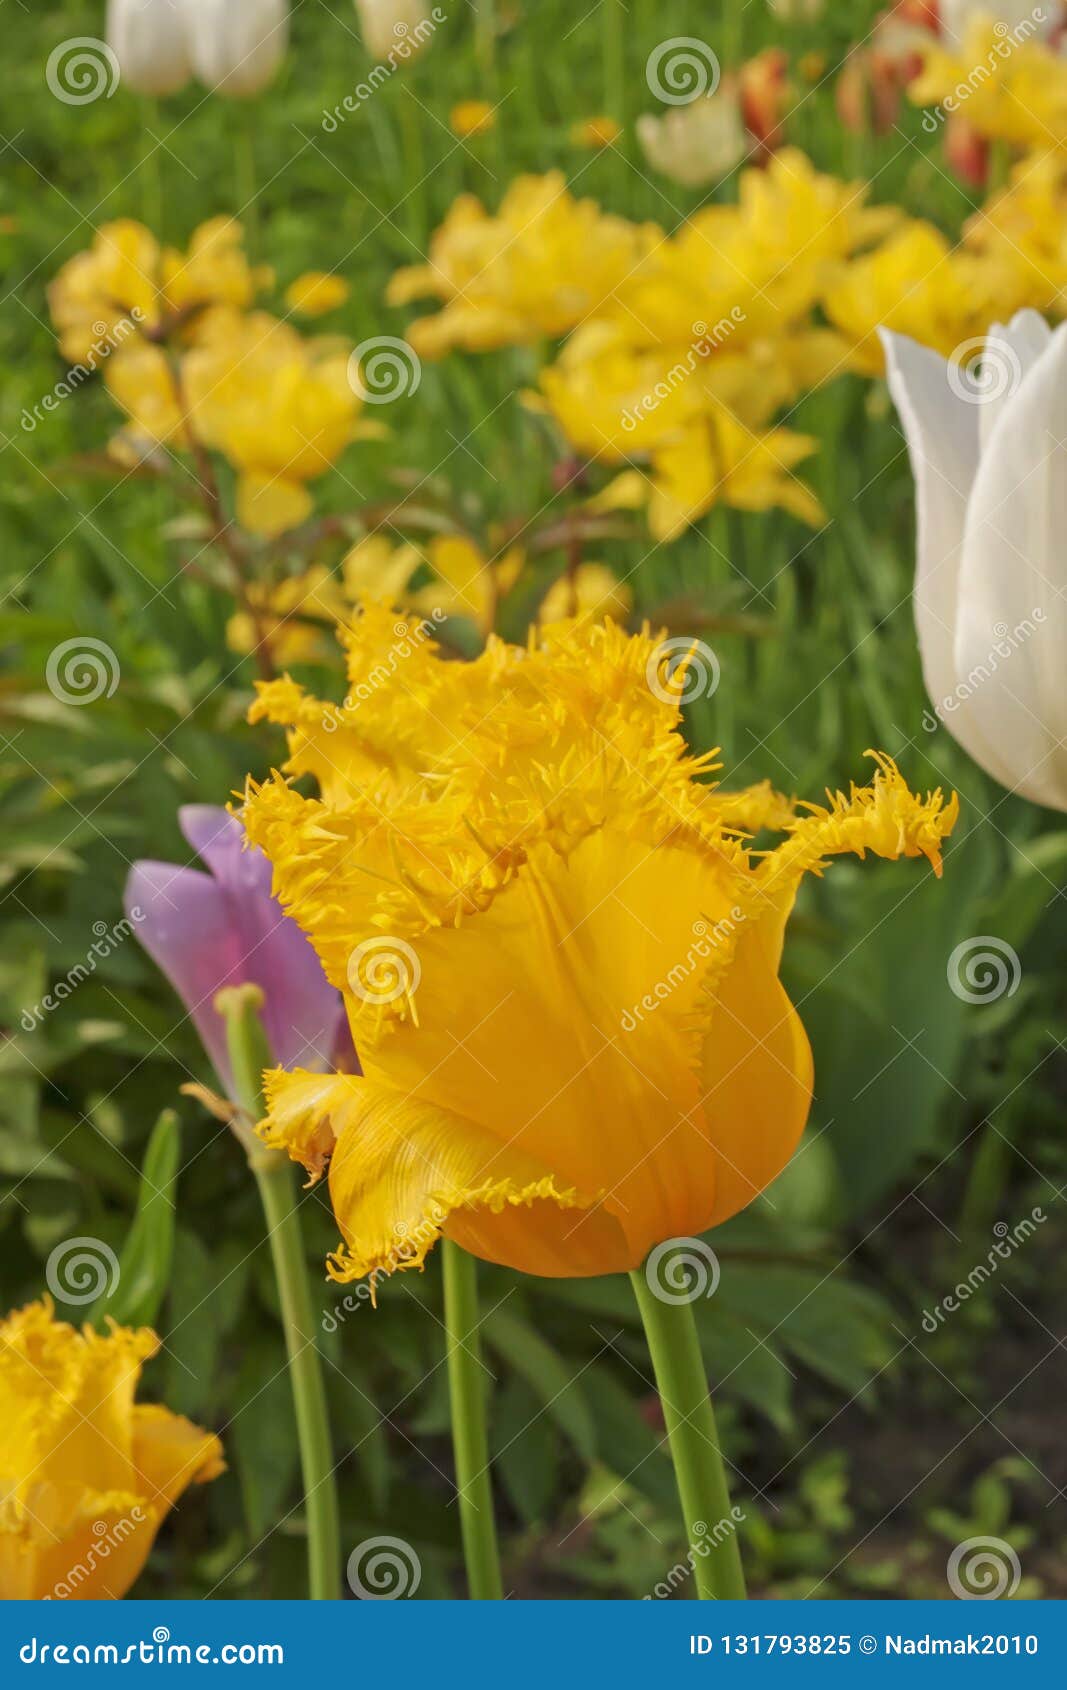 Yellow Tulip With Fringe Against The Background Of Other Tulips In The Garden Stock Image Image Of Against Diverse 131793825